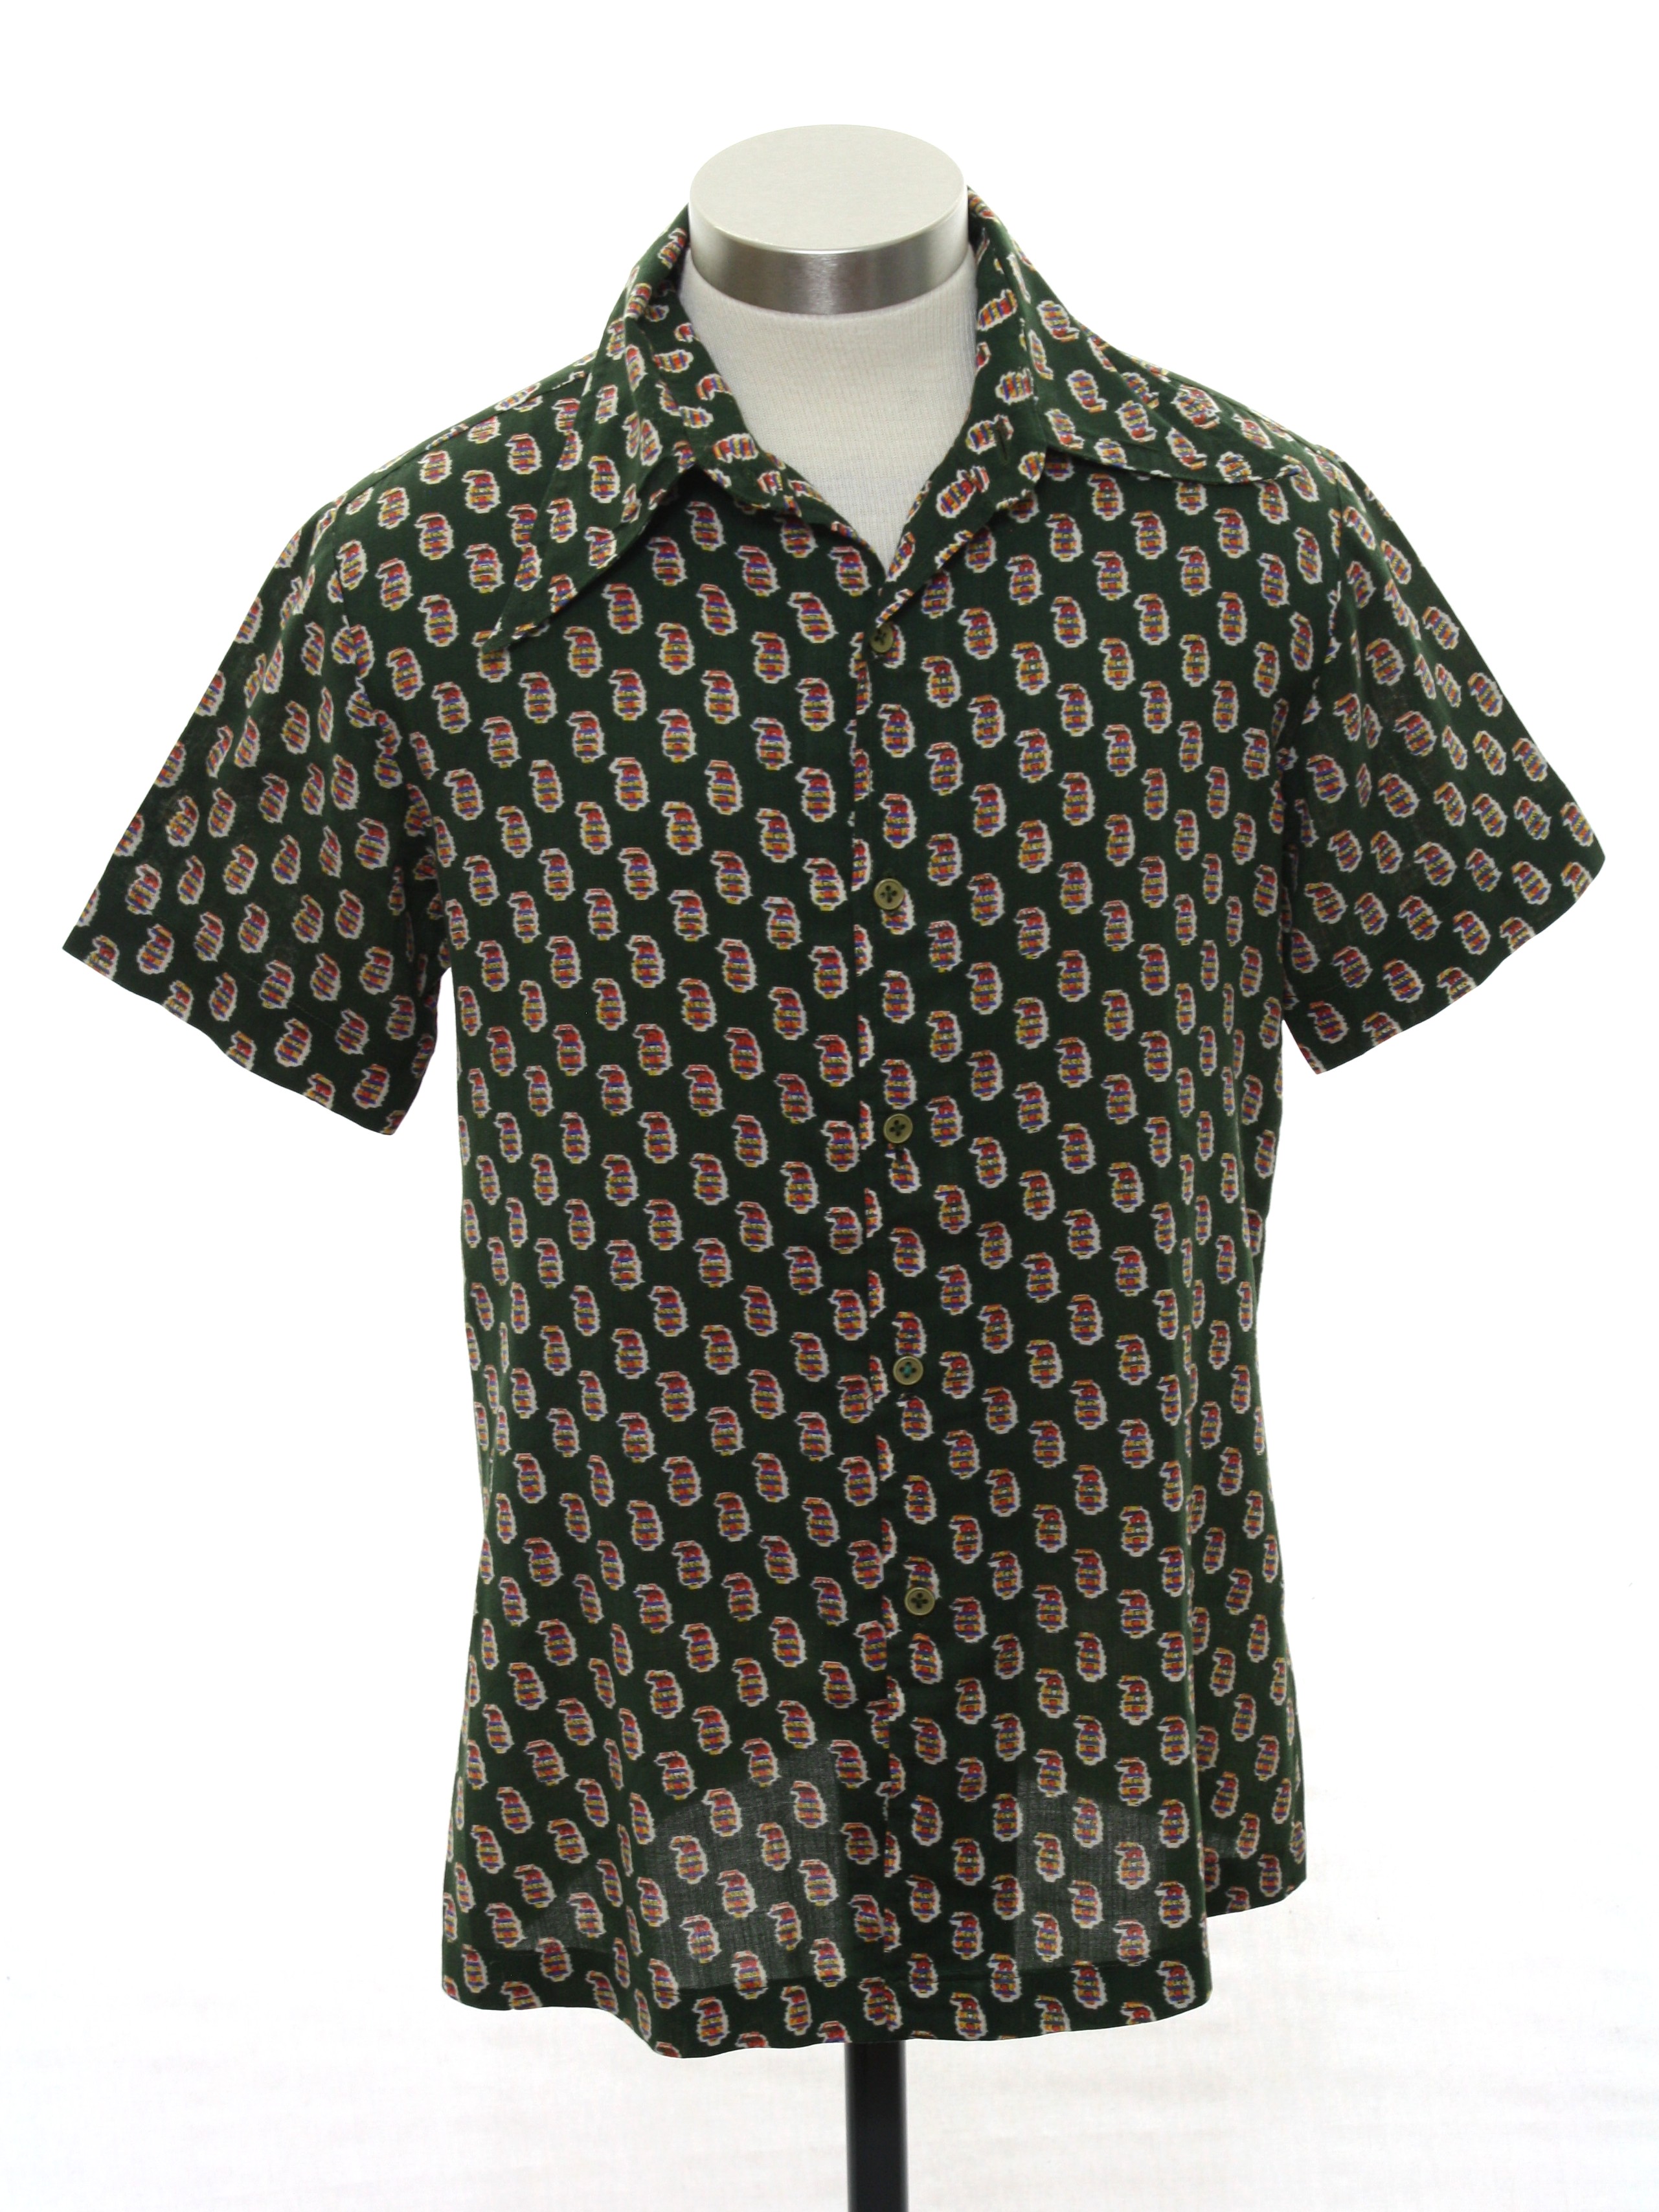 Exclusively His 60's Vintage Shirt: Late 60s or early 70s -Exclusively ...